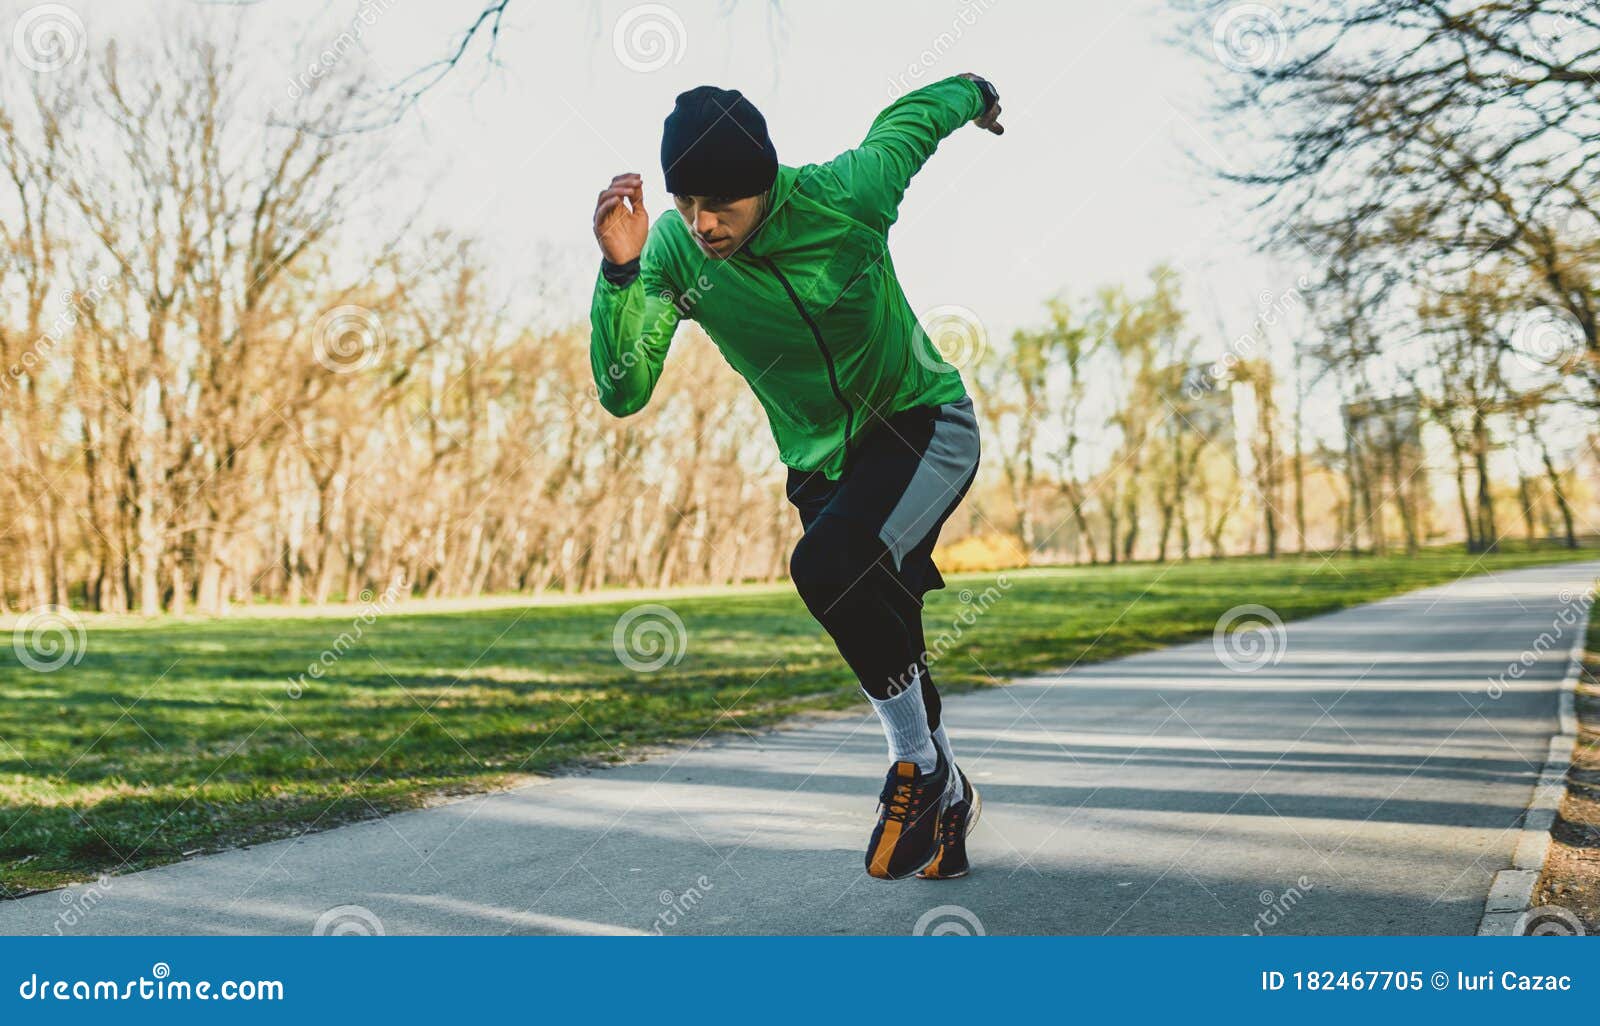 Outdoor Shot Of A Jogger Young Man Running On A Trail Athletic Male